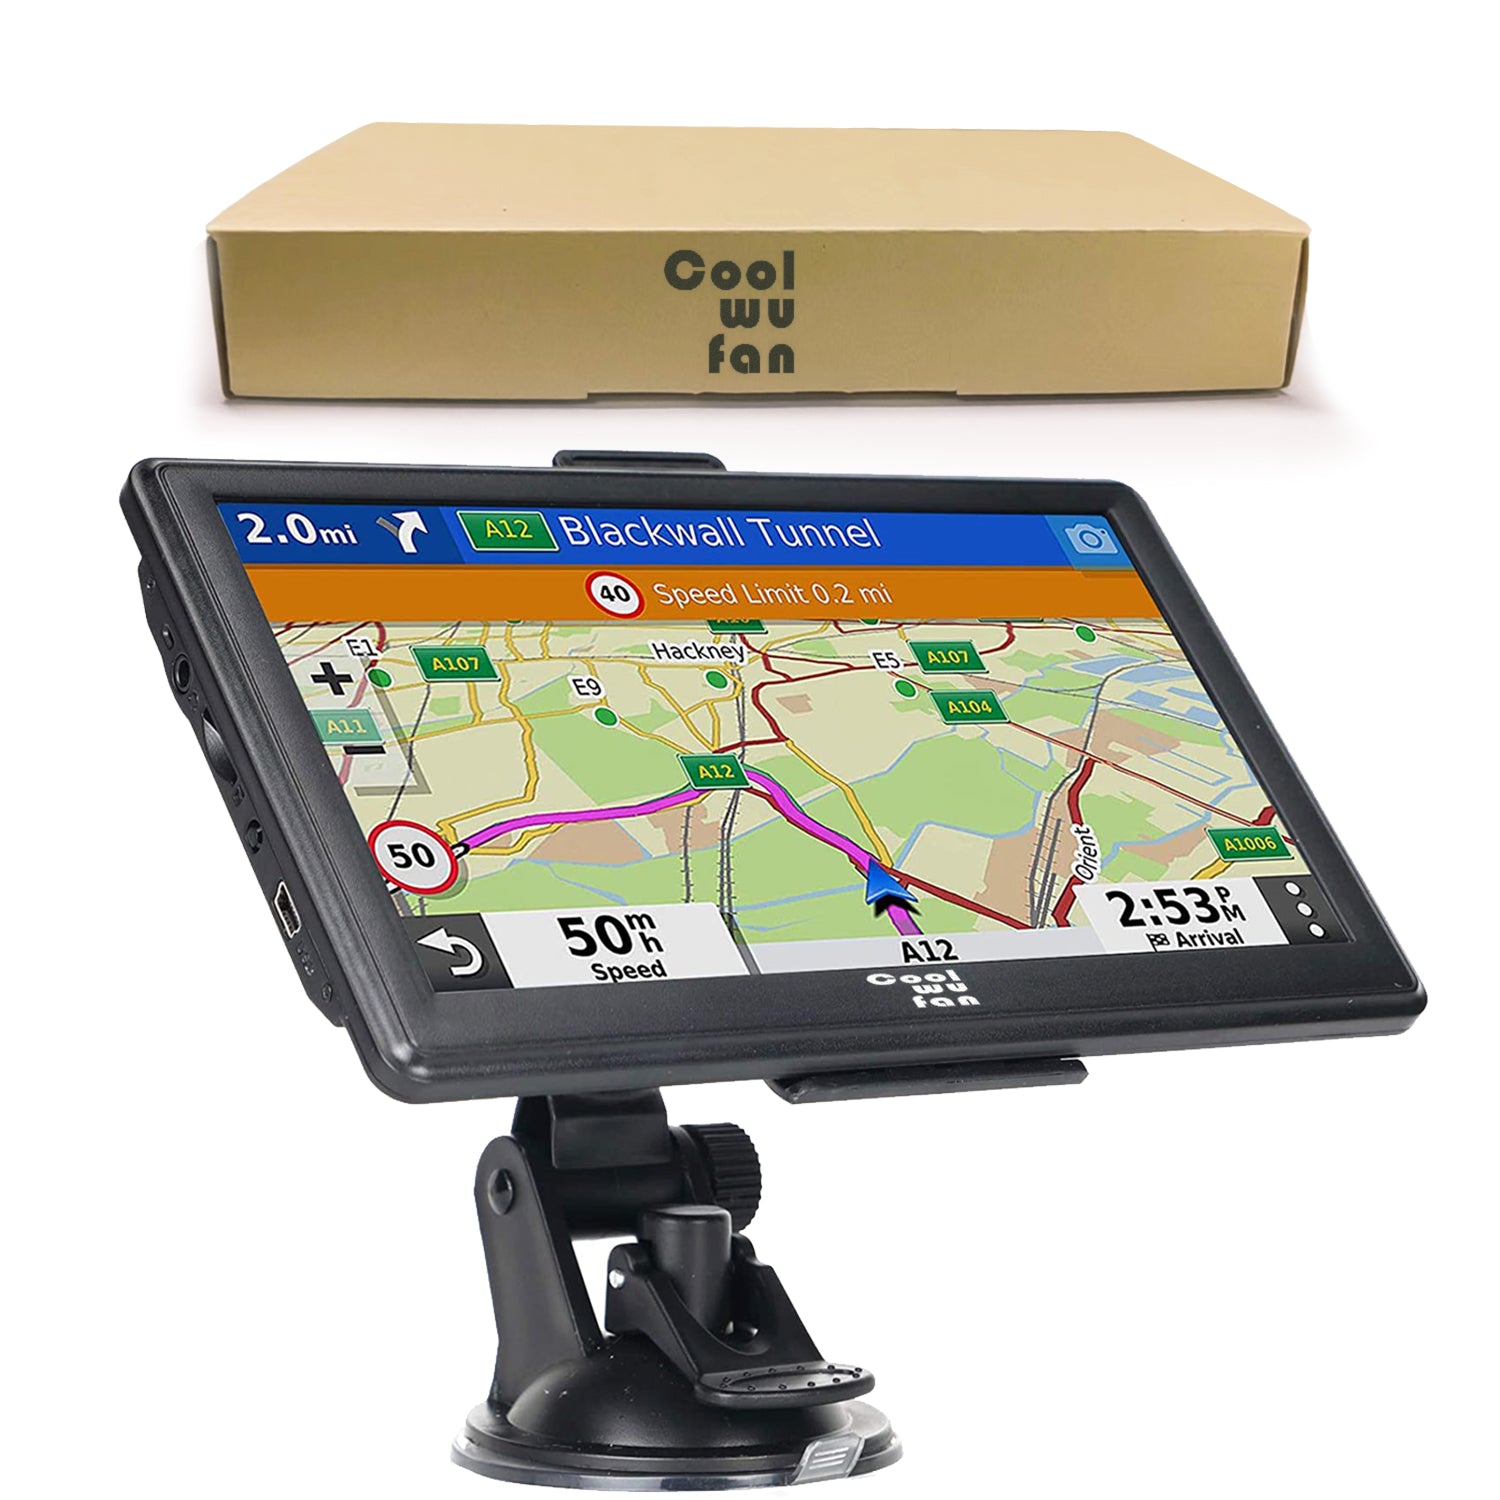 COOLWUFAN GPS Navigation for Truck RV Car, 7 inch Truckers Trucking GPS Navigation System, Truck GPS Commercial Drivers, Free Lifetime Map Updates, Speed Warning, Spoken Turn-by-Turn Directions